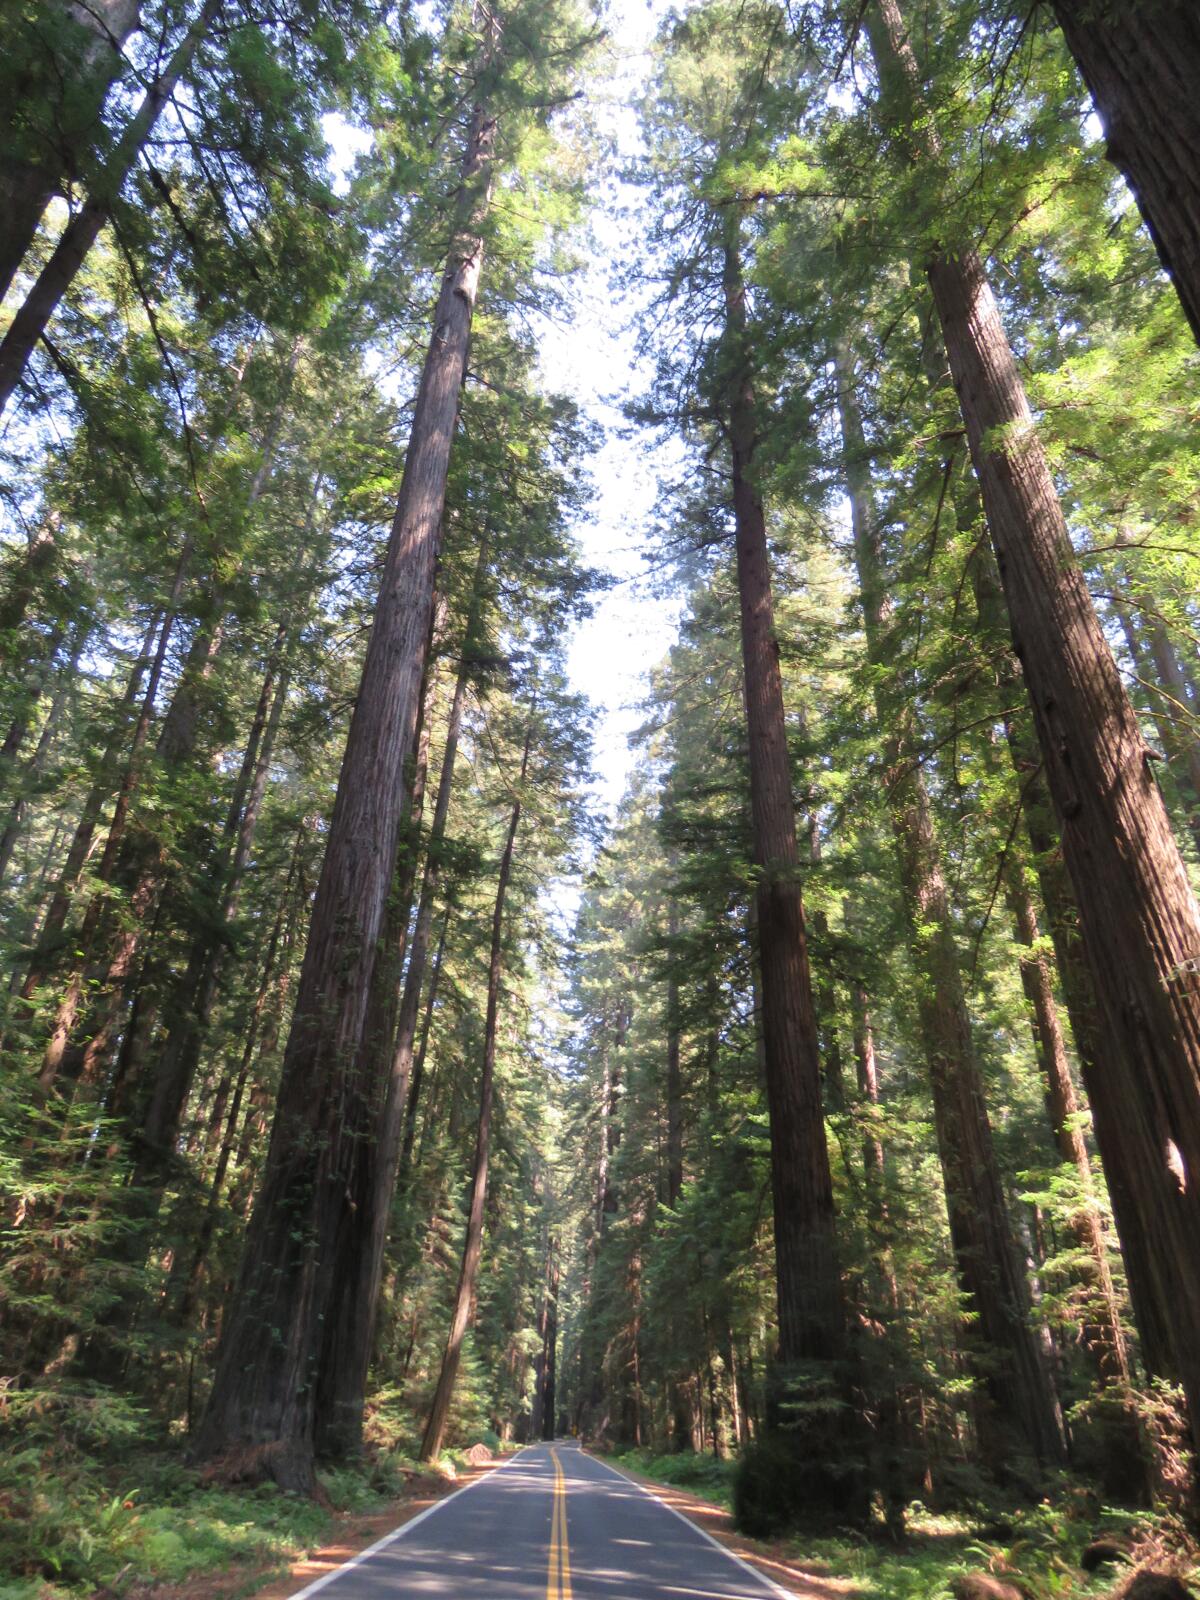 A paved road passes between towering redwood trees.